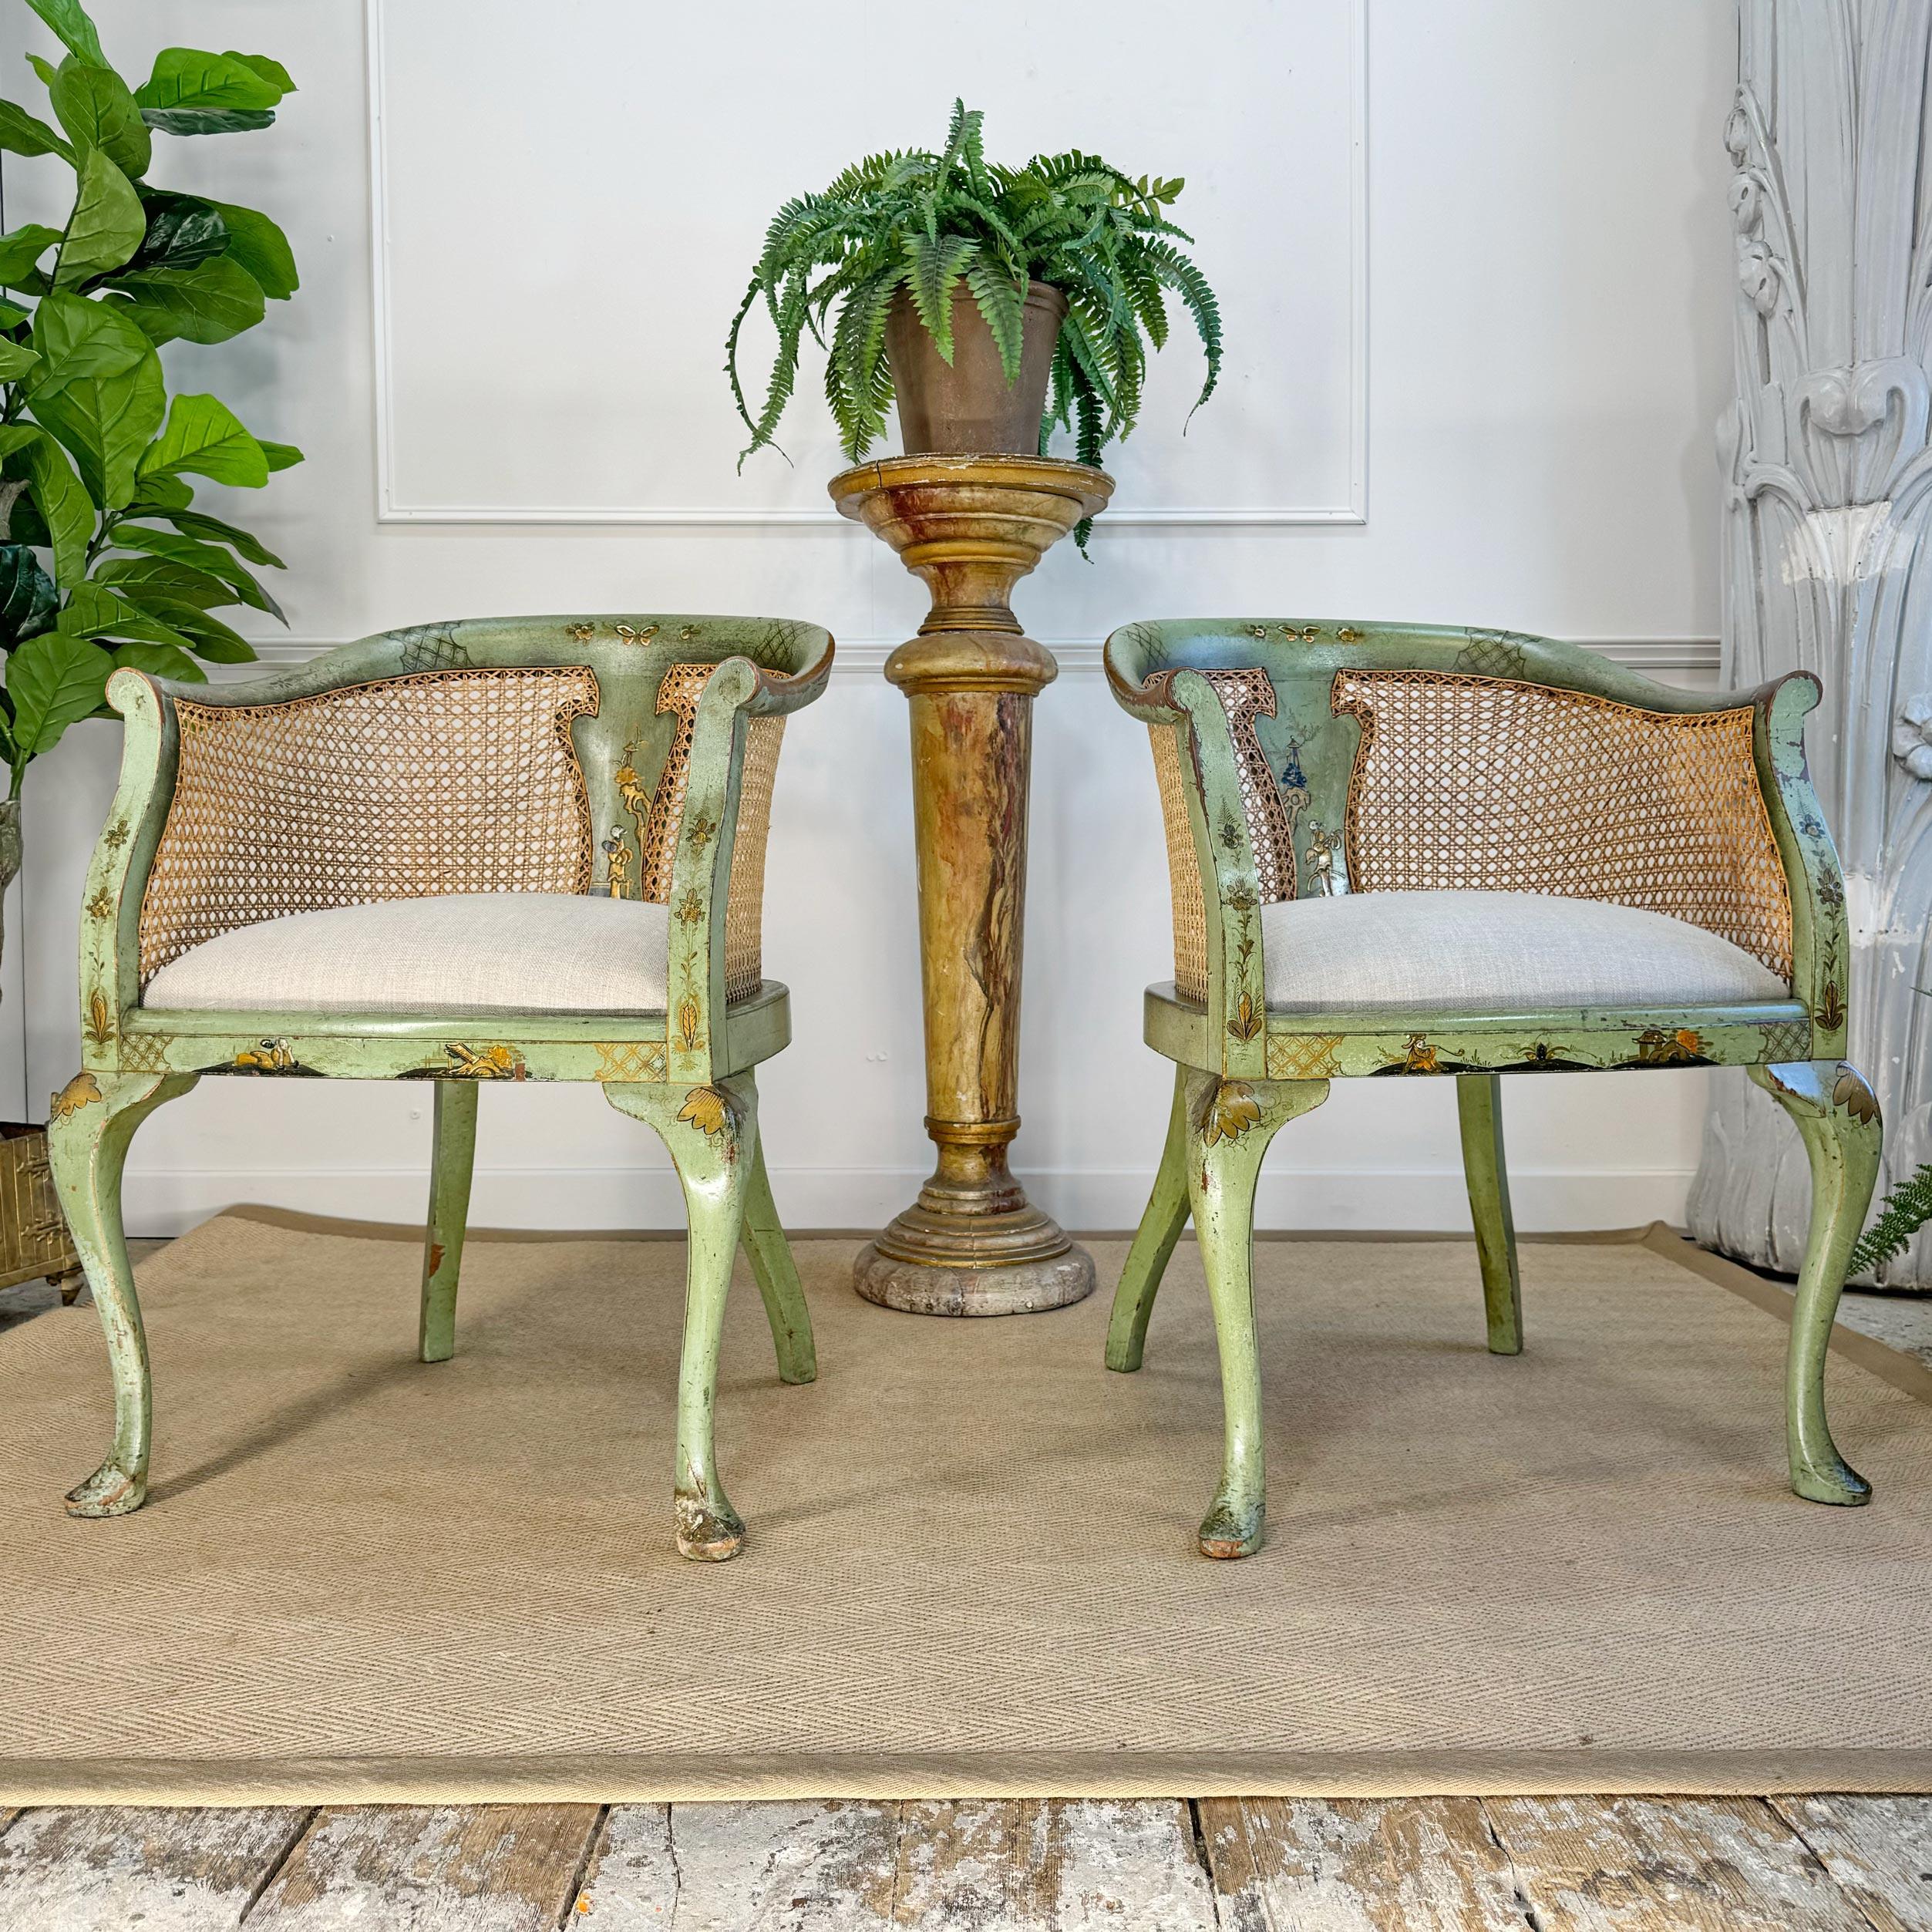 An outstanding pair of circa 1890 English, Queen Anne Revival bergère armchairs, in a glorious light green paint, with applied gilt chinoiserie decoration throughout. All canework has been professionally updated and is in excellent order.



The